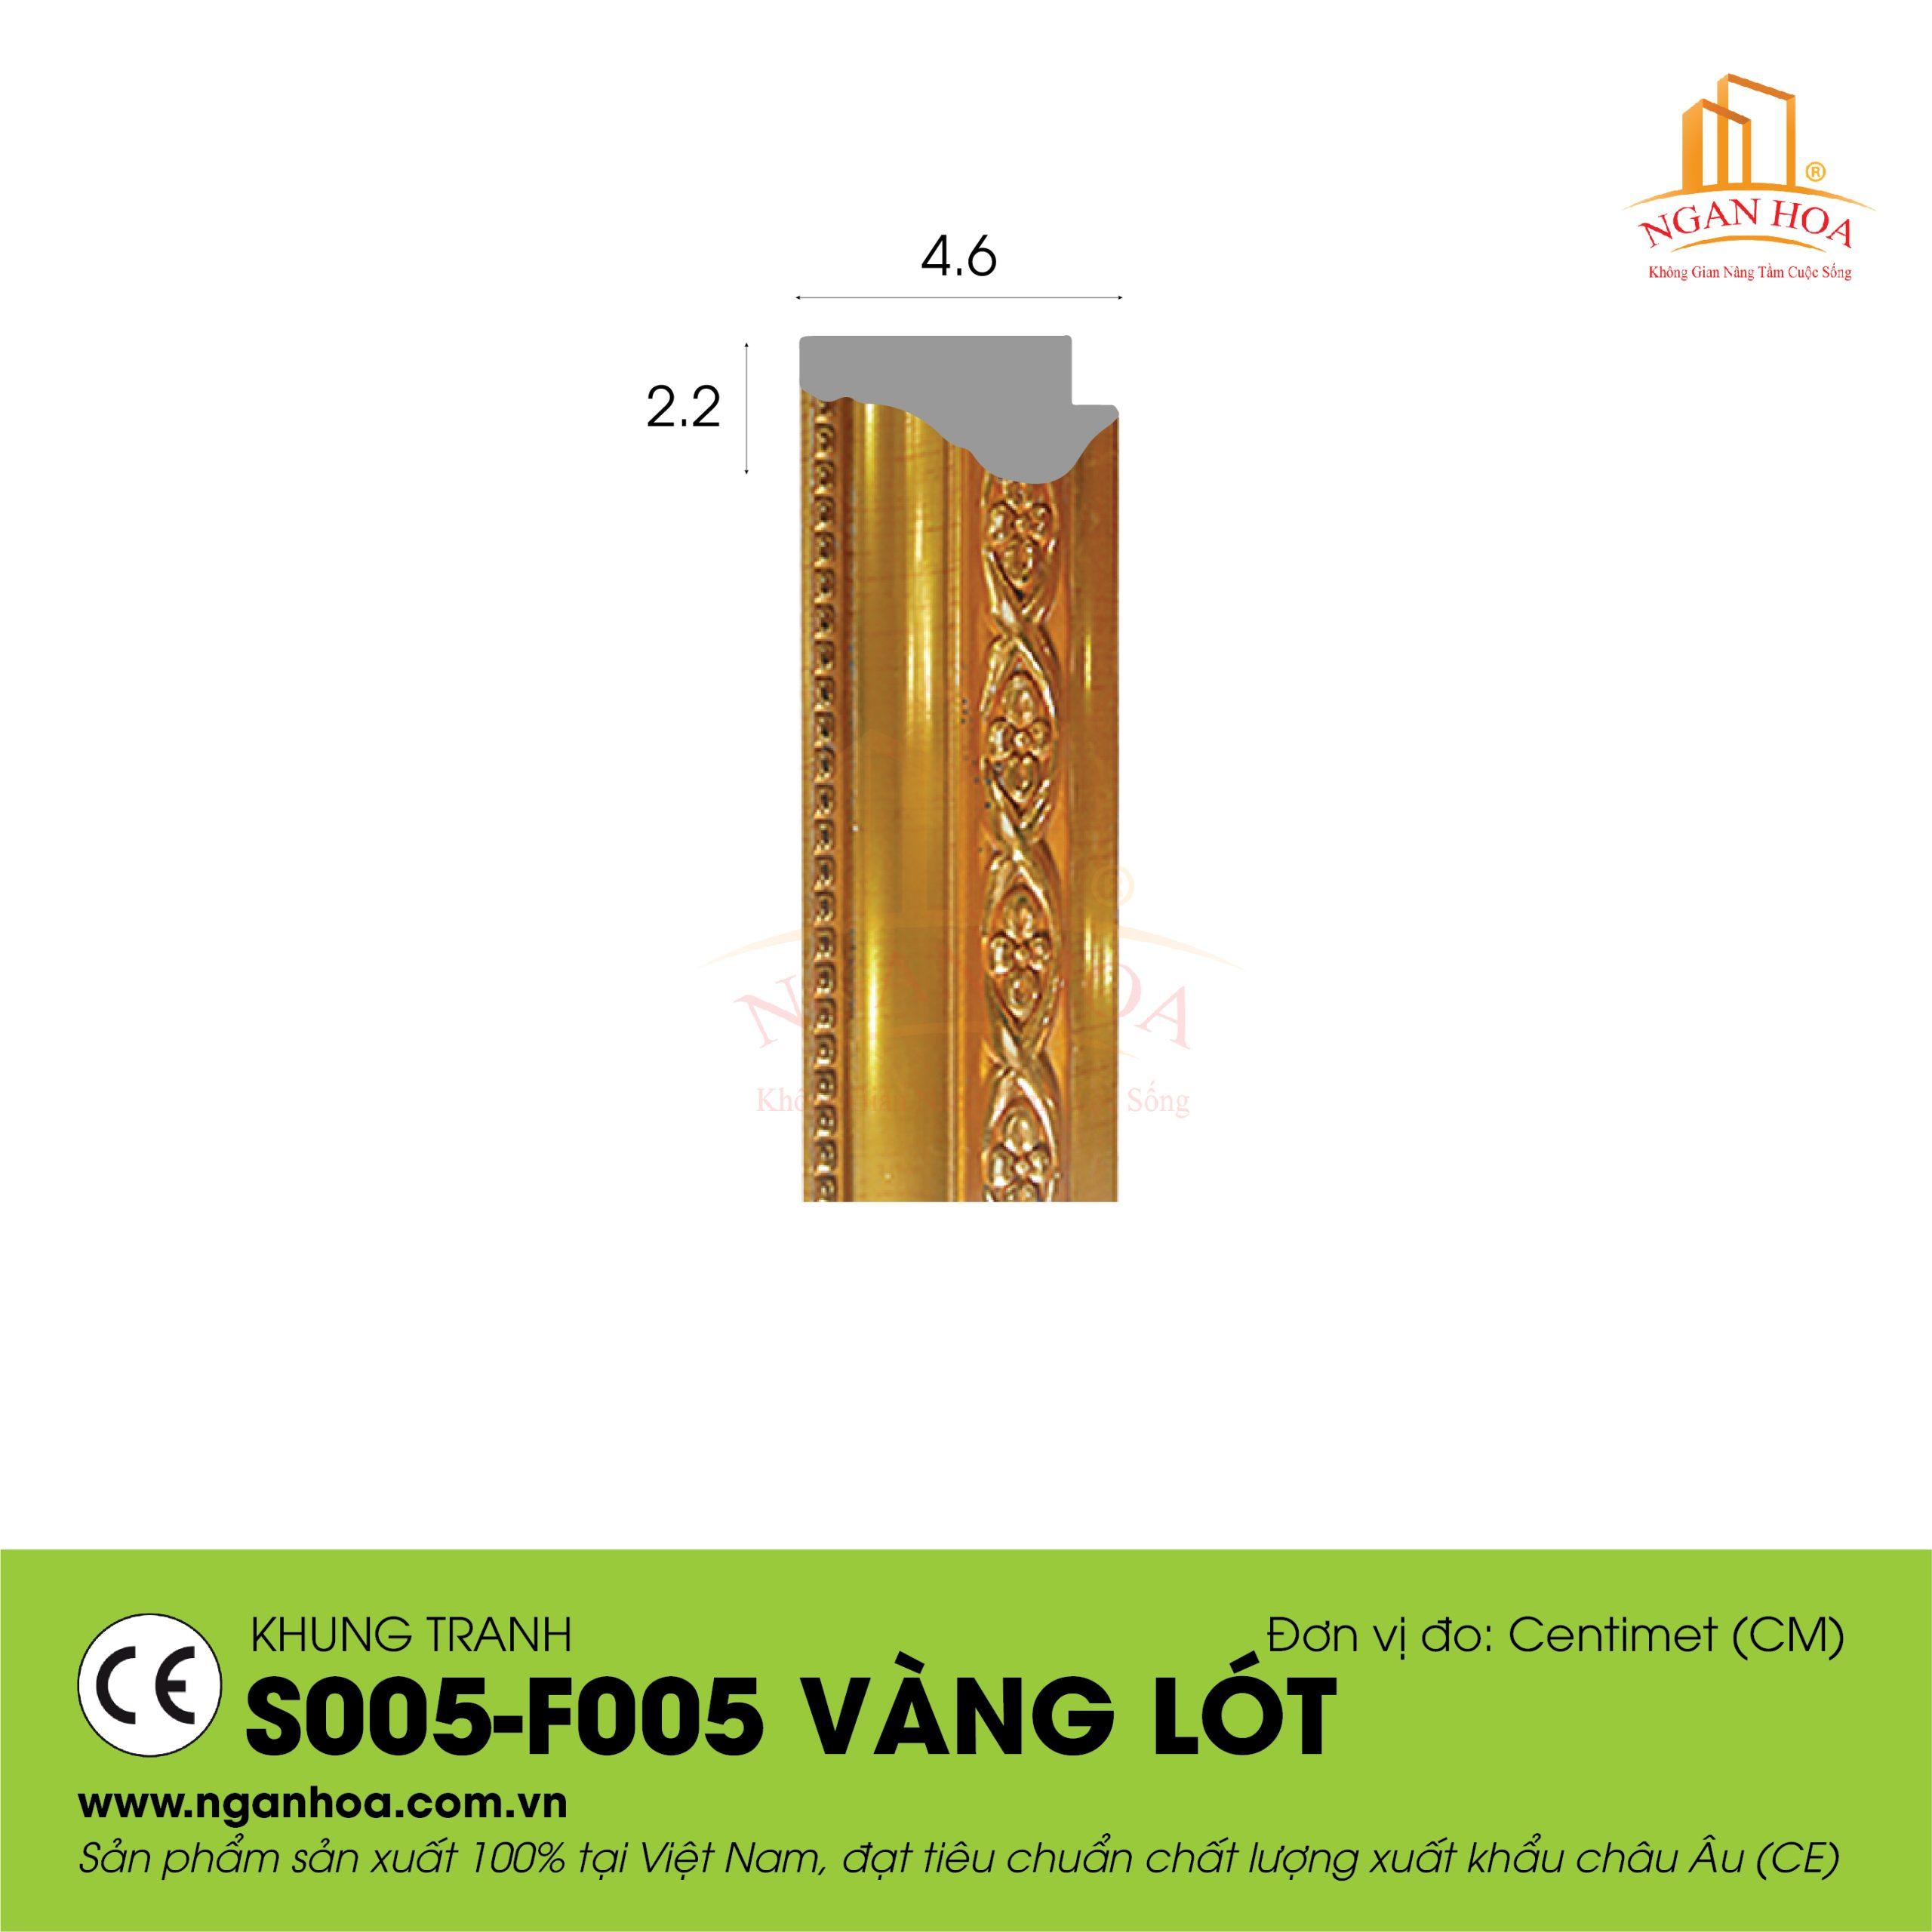 KT S005 F005 Vang lot scaled